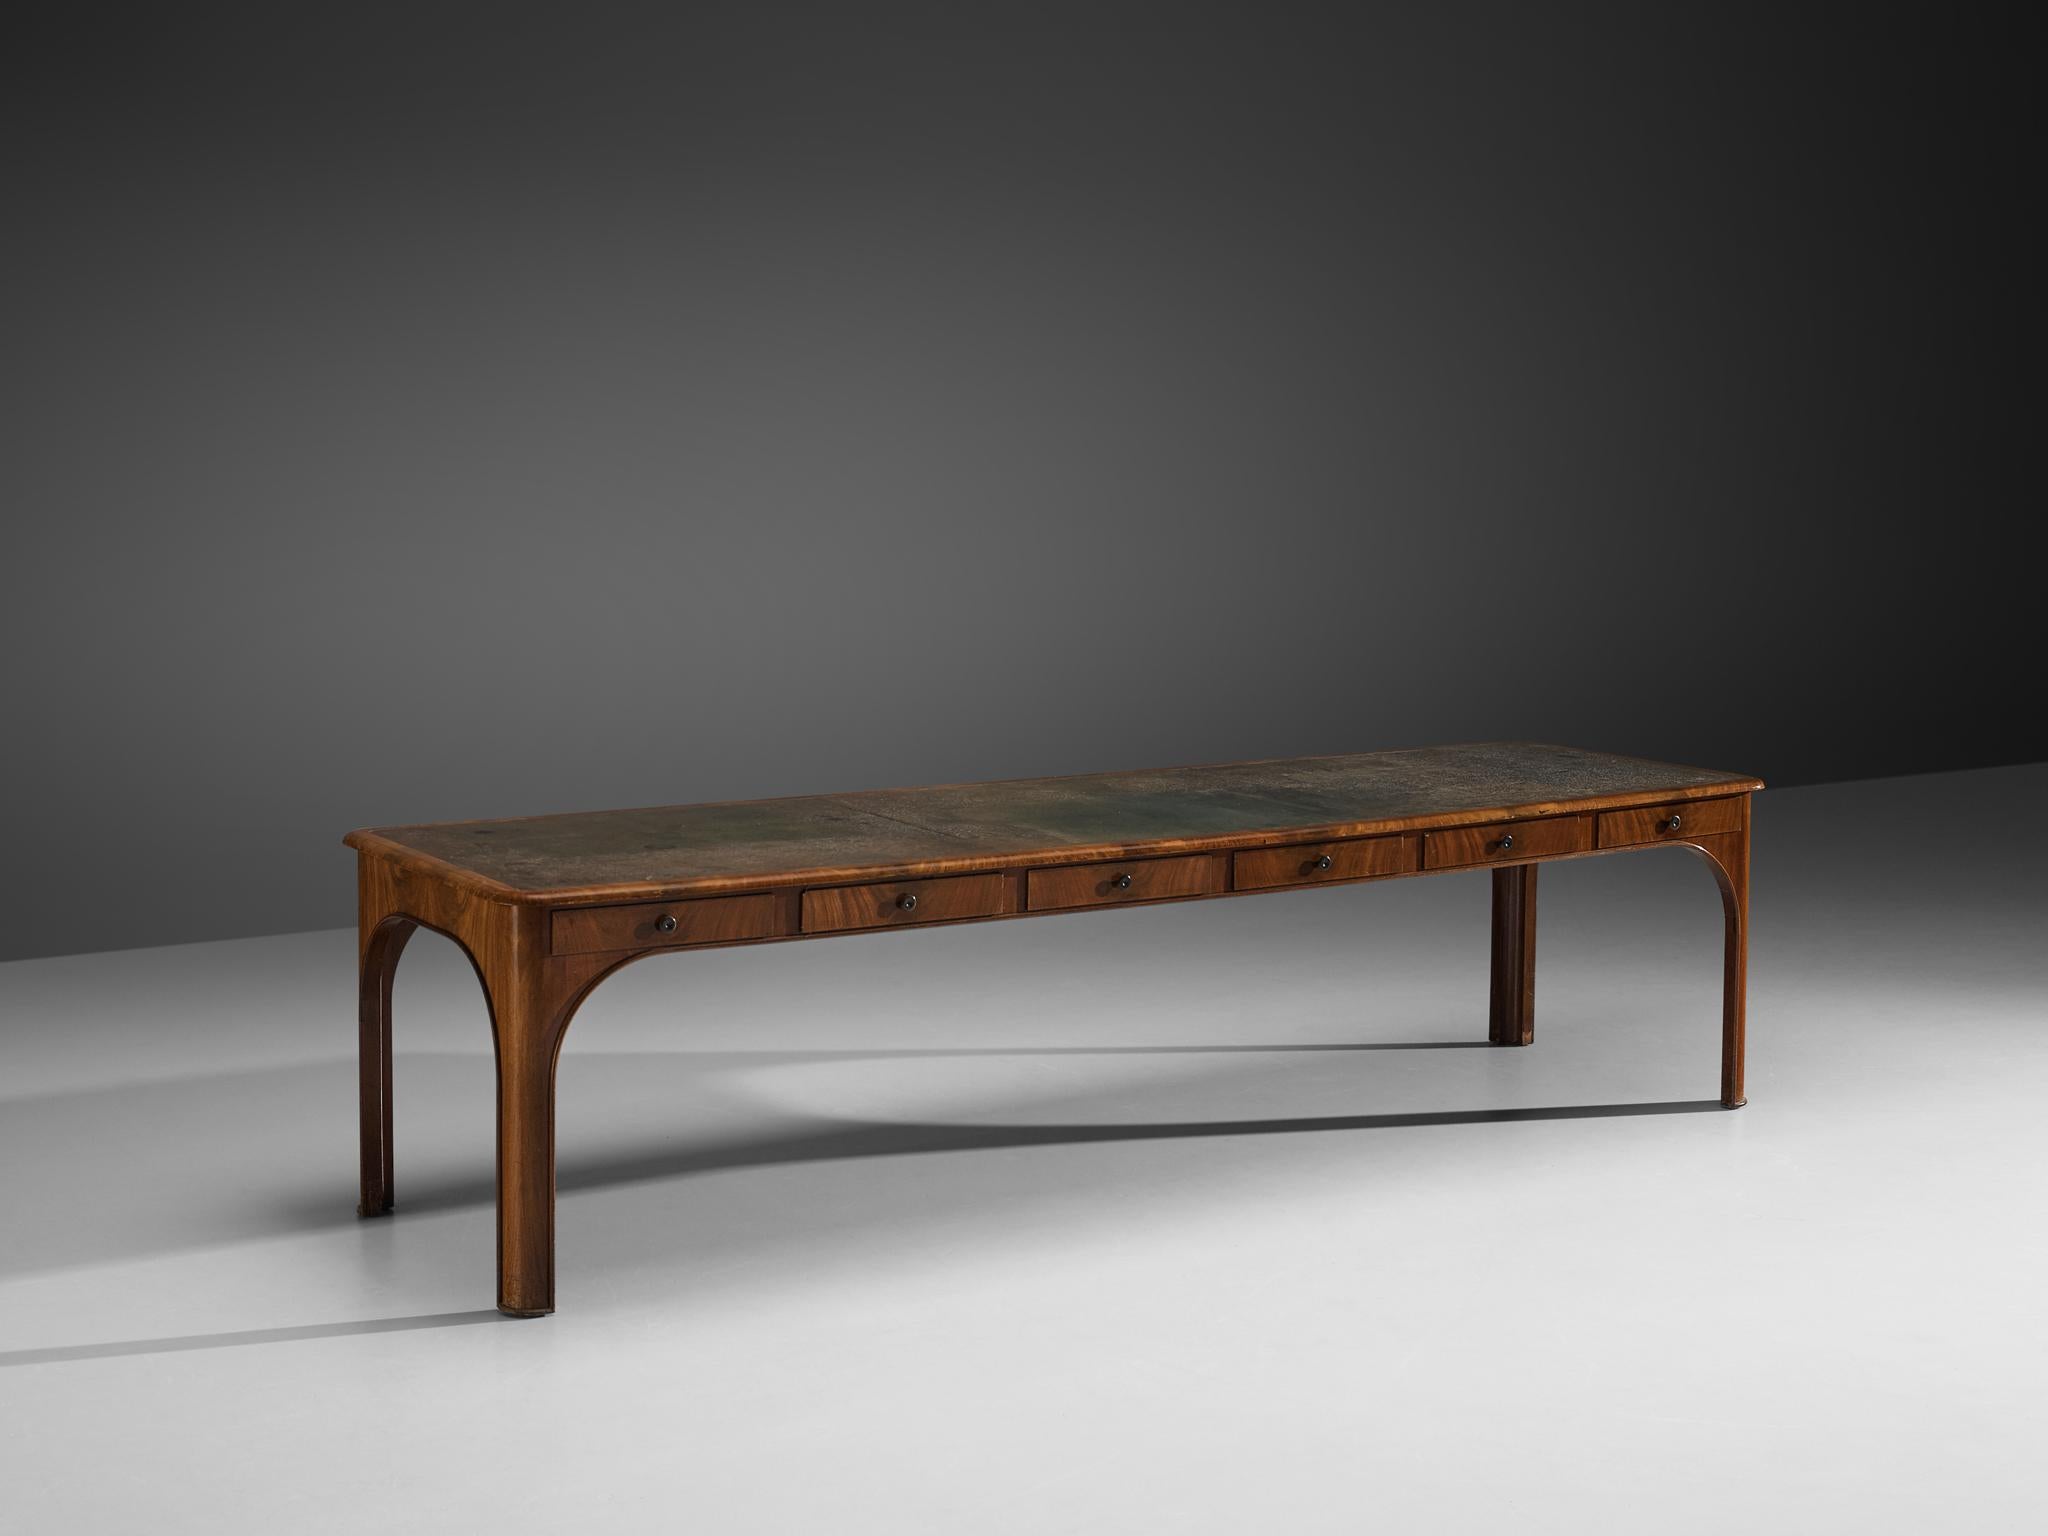 Niels August Theodor Kaj Gottlob, long dining or conference table with drawers, Caucasian nutwood, brass, leather, Denmark, 1920s

A very rare and exceptionally long library table designed by Kaj Gottlob (1887-1976), one of the most important Danish